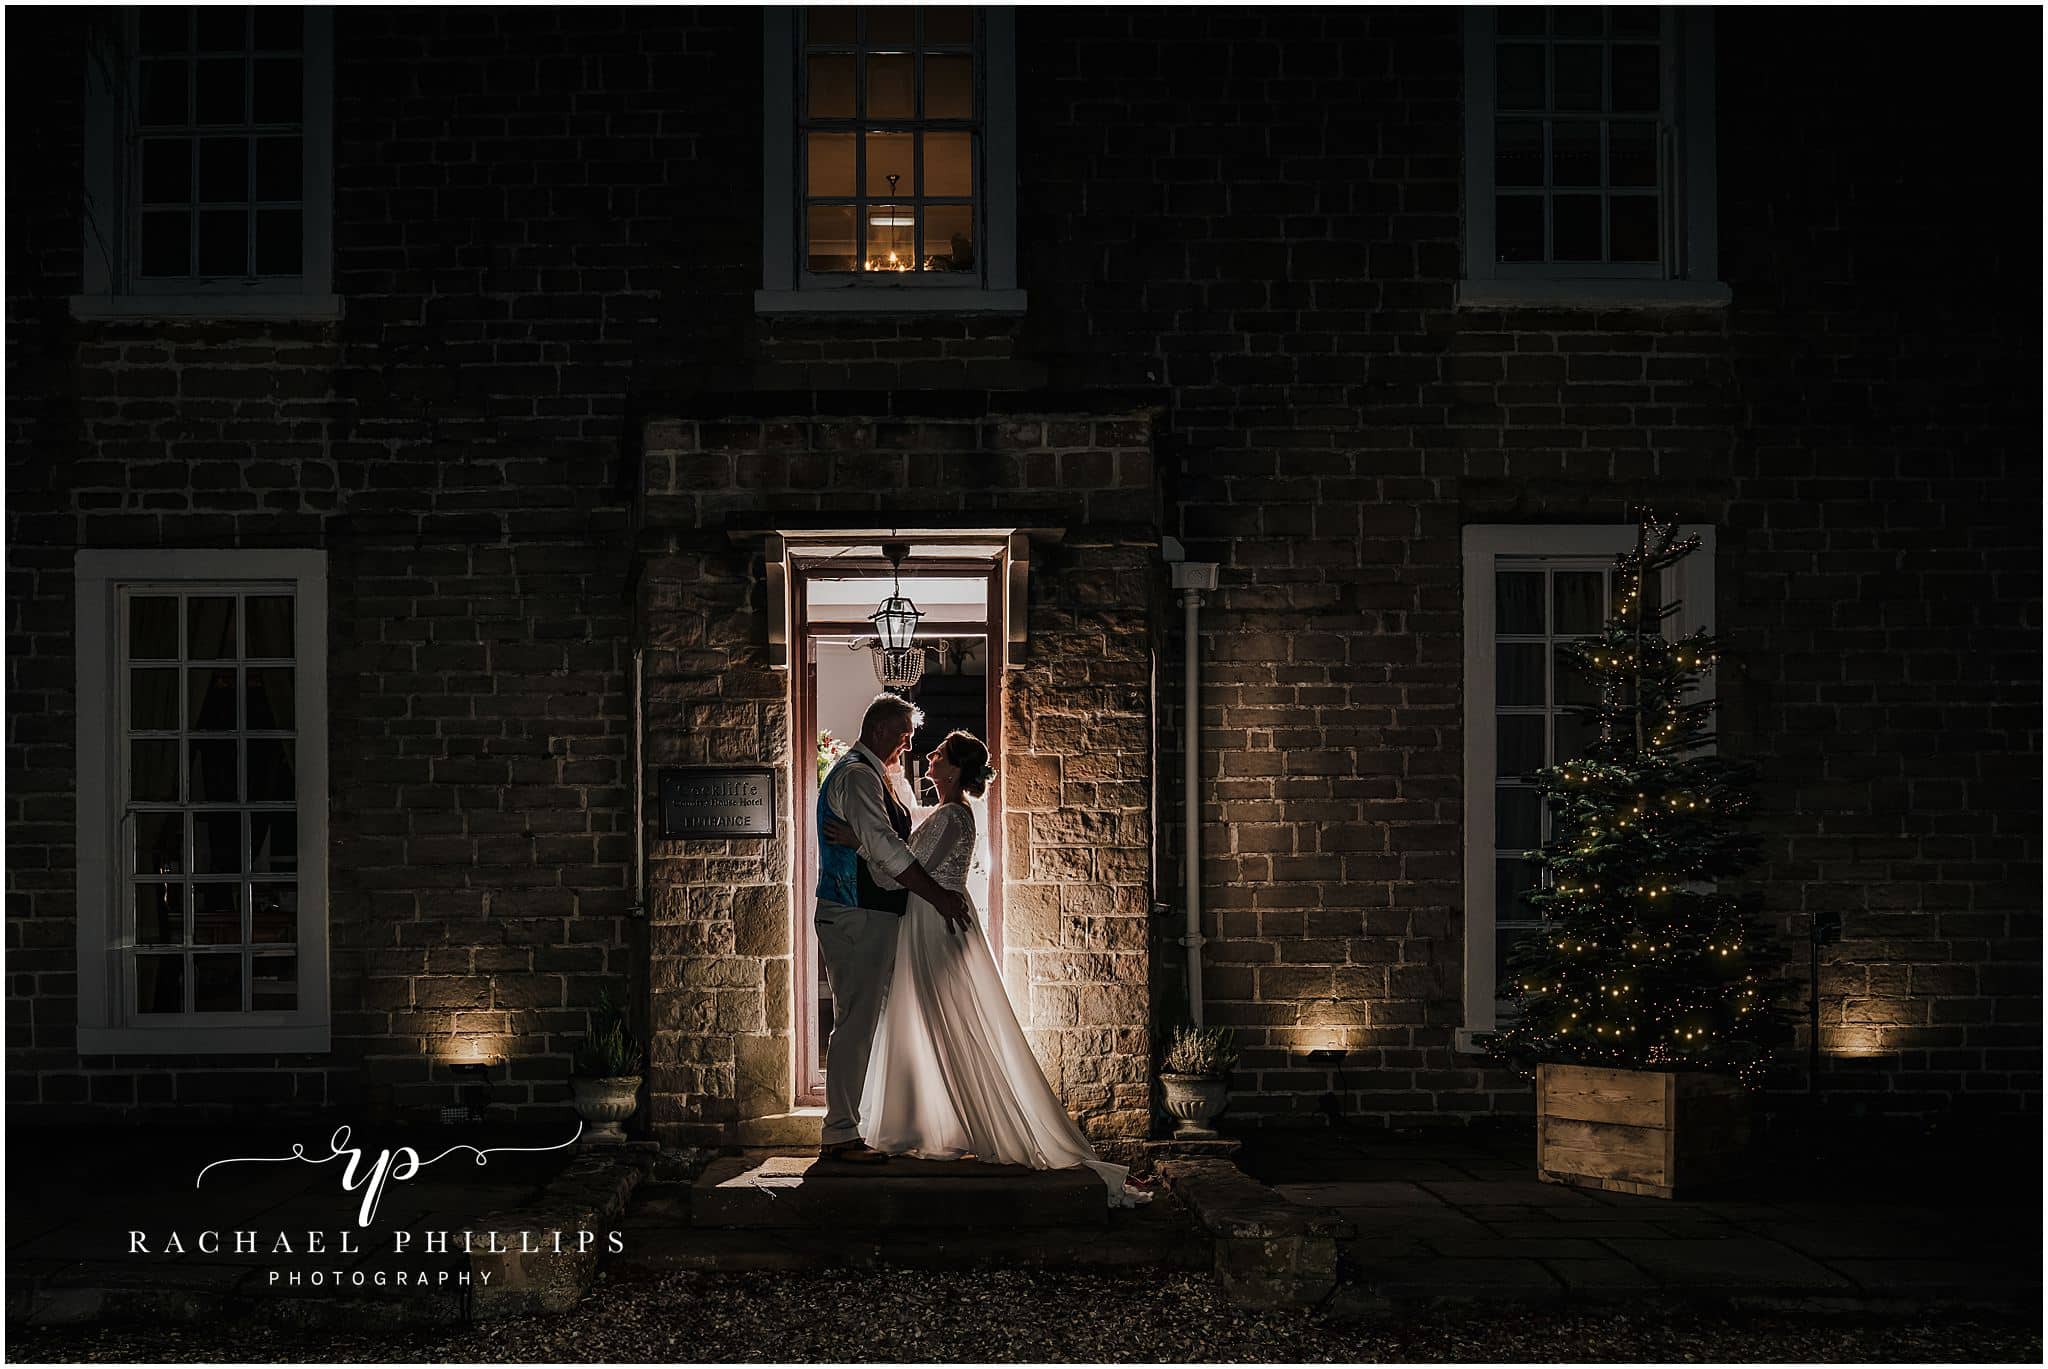 wedding venue cockliffe country house in nottingham, wedding photographer, rachael phillips photography, derby and nottingham